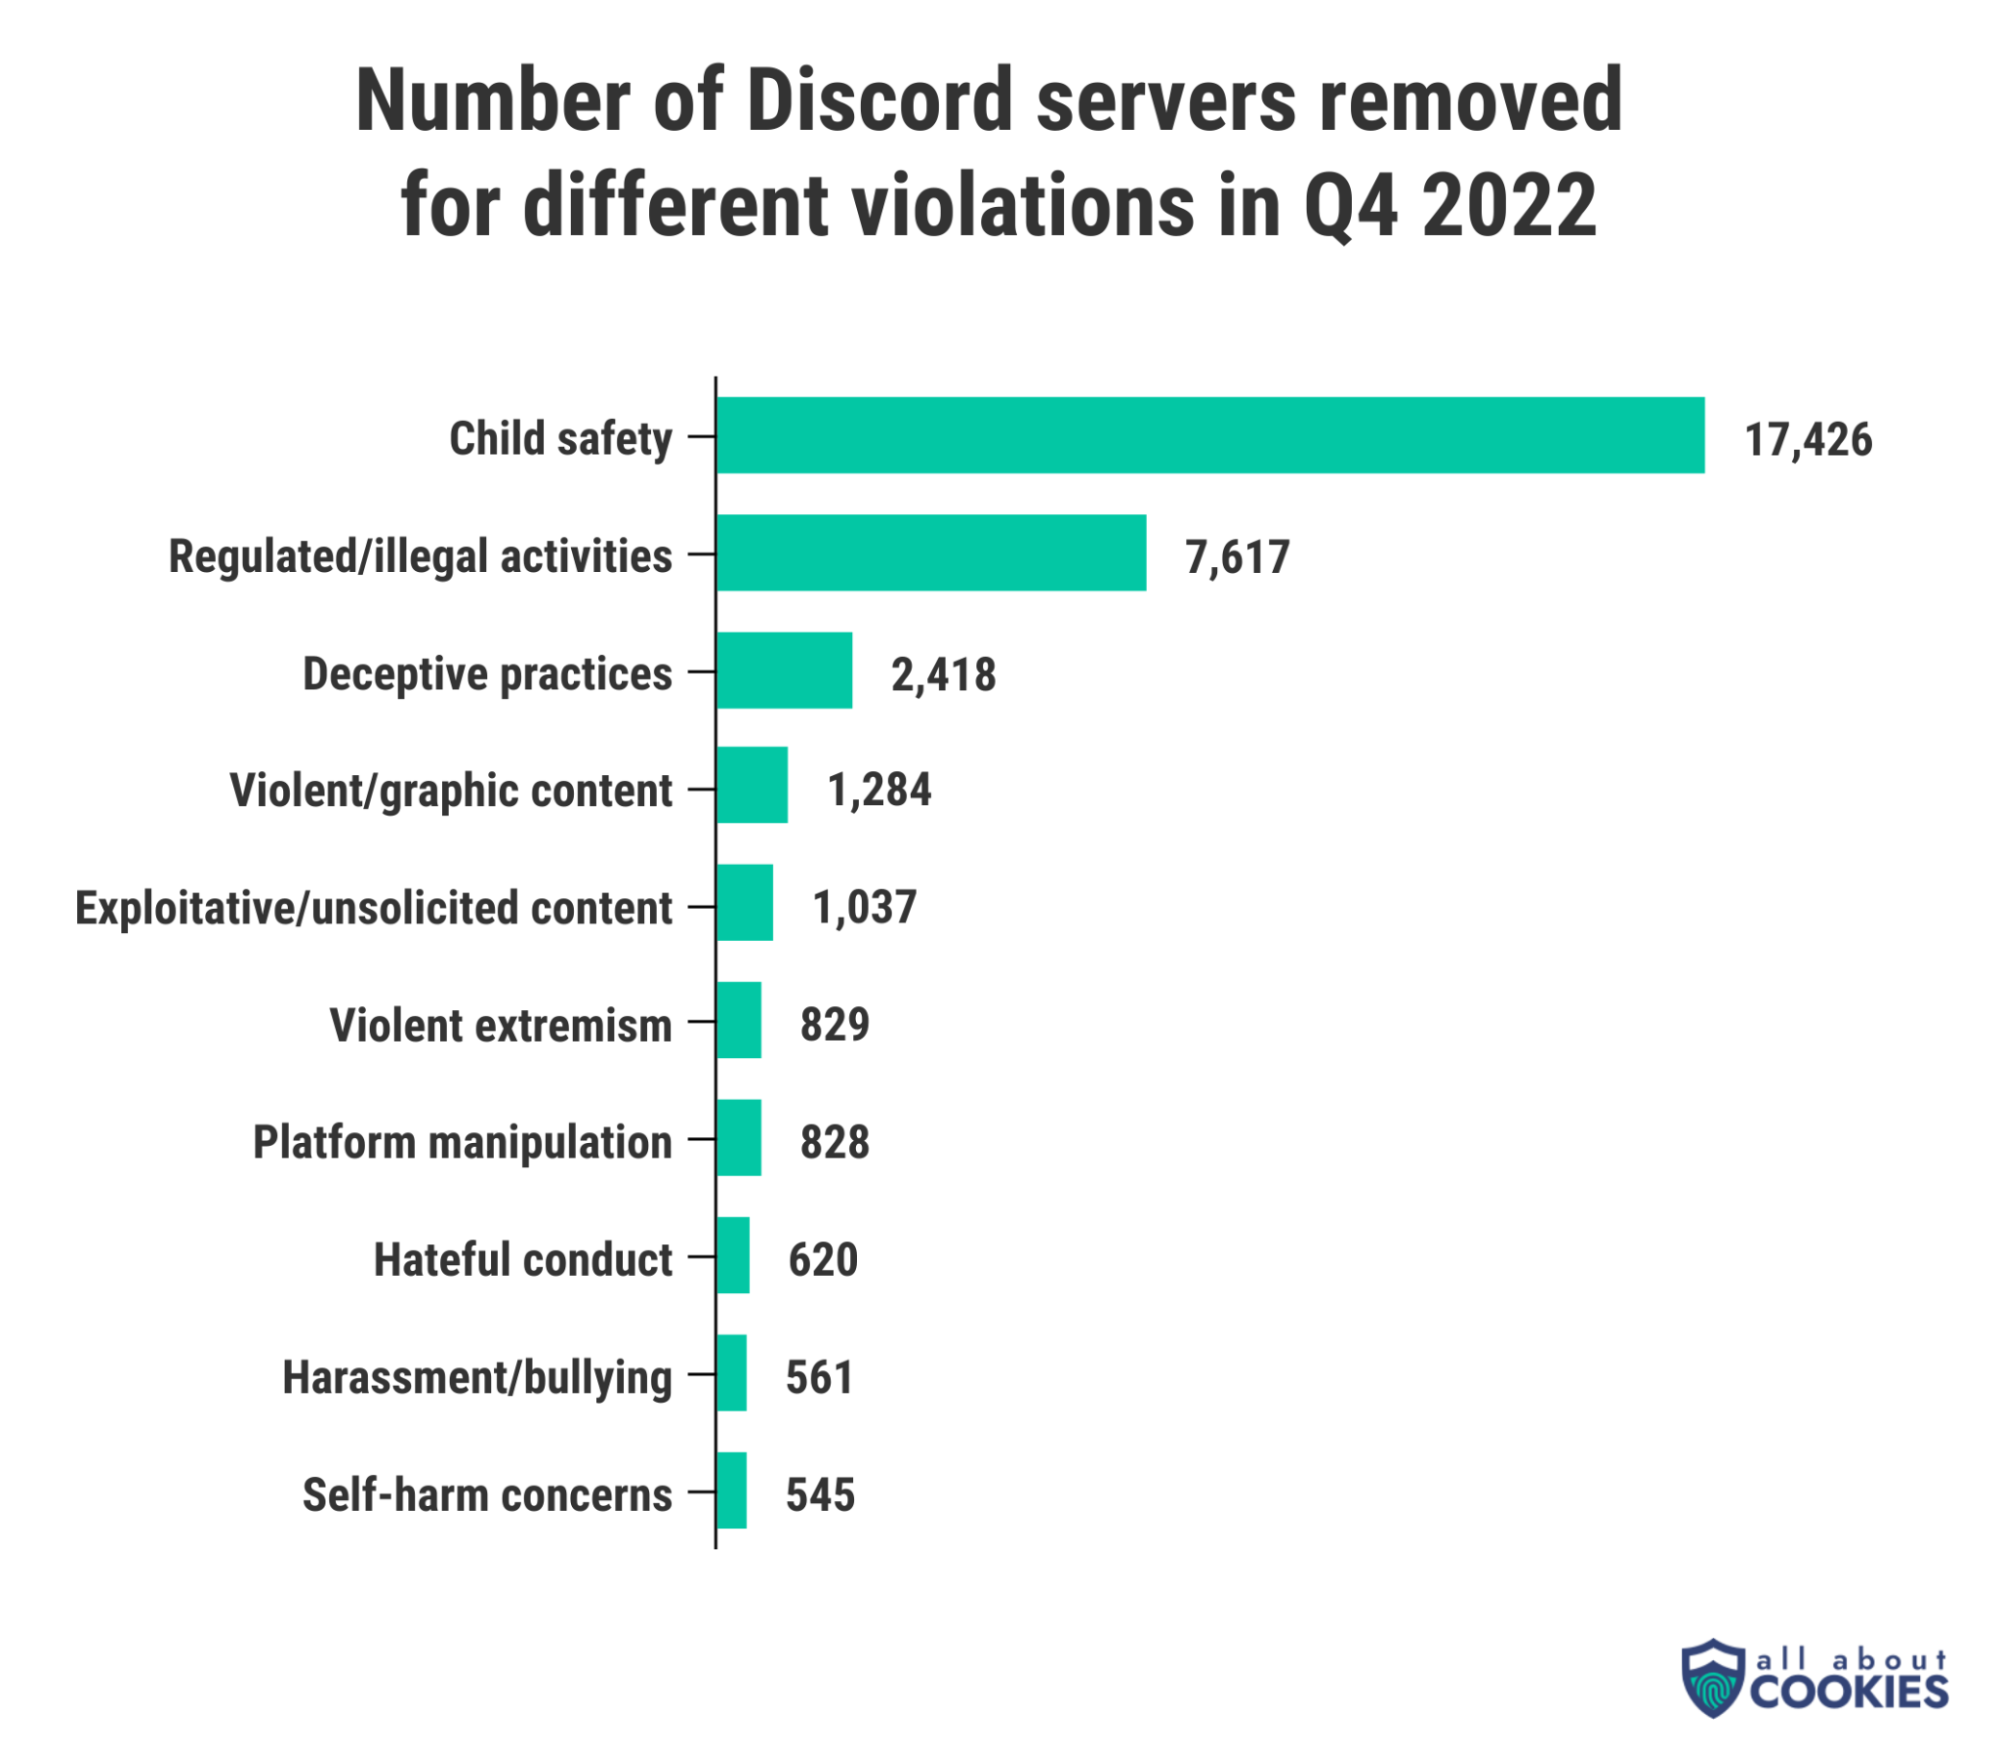 In Q4 2022, over 17,000 Discord servers were removed due to child safety concerns.